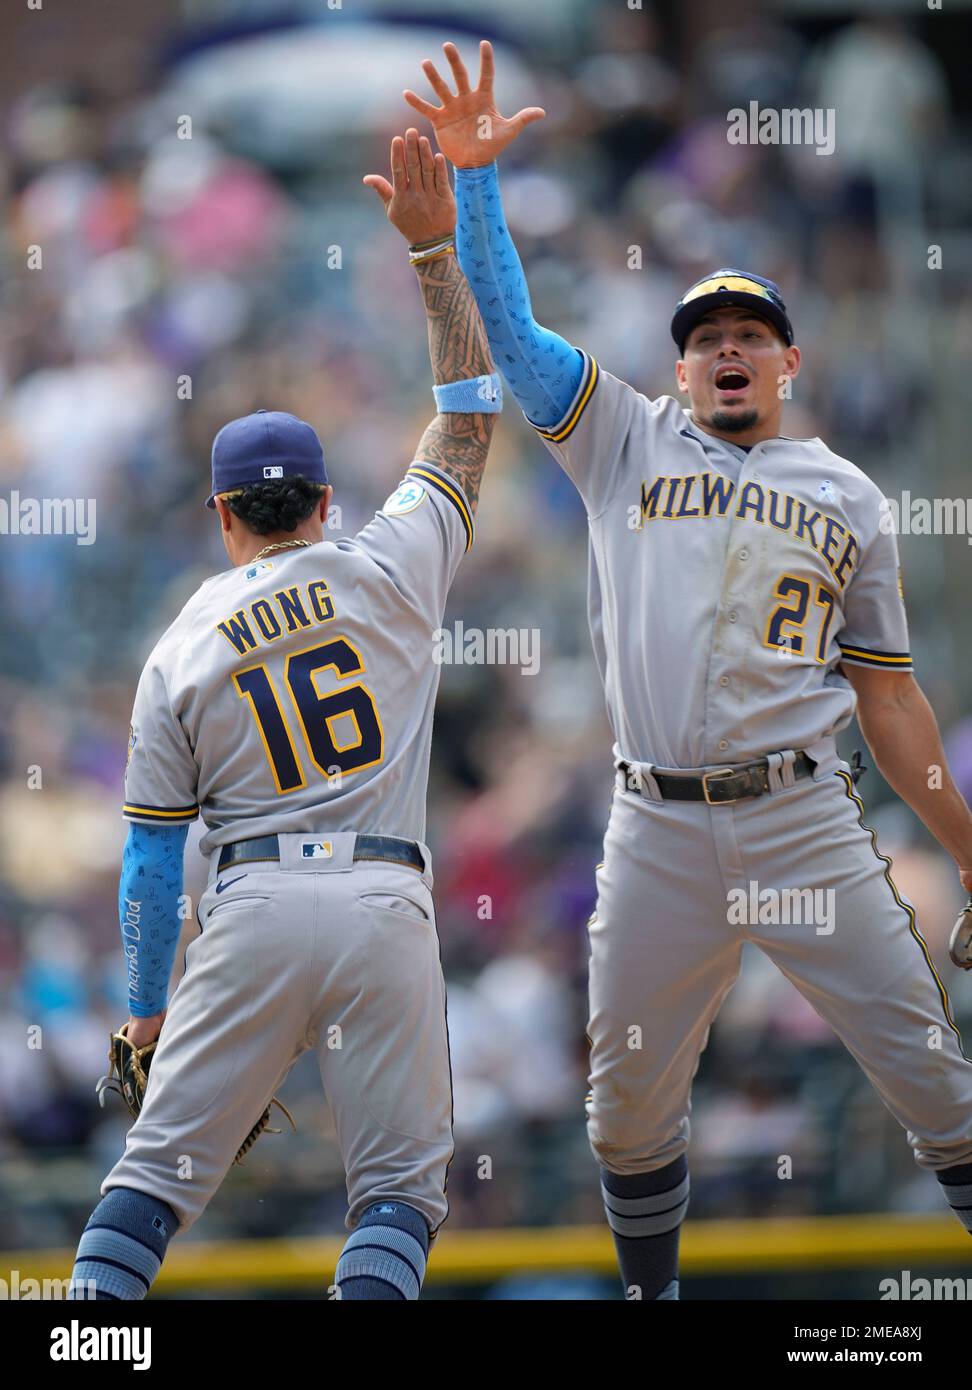 Milwaukee Brewers shortstop Willy Adames, right, celebrates with second  baseman Kolten Wong after a baseball game